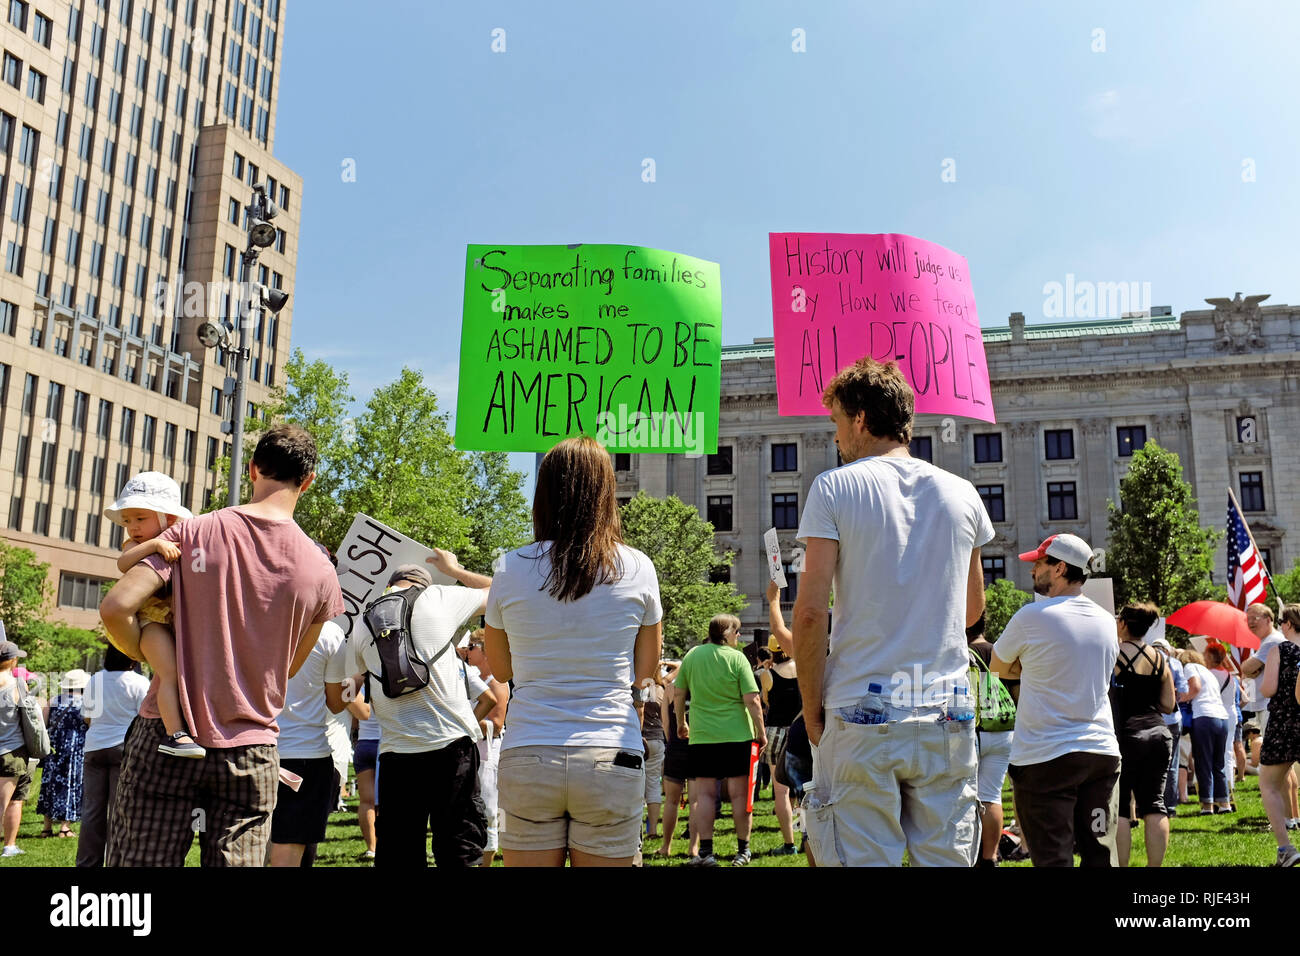 Protesters in Cleveland, Ohio, USA rally against Trump immigration policies separating families at the US border. Stock Photo